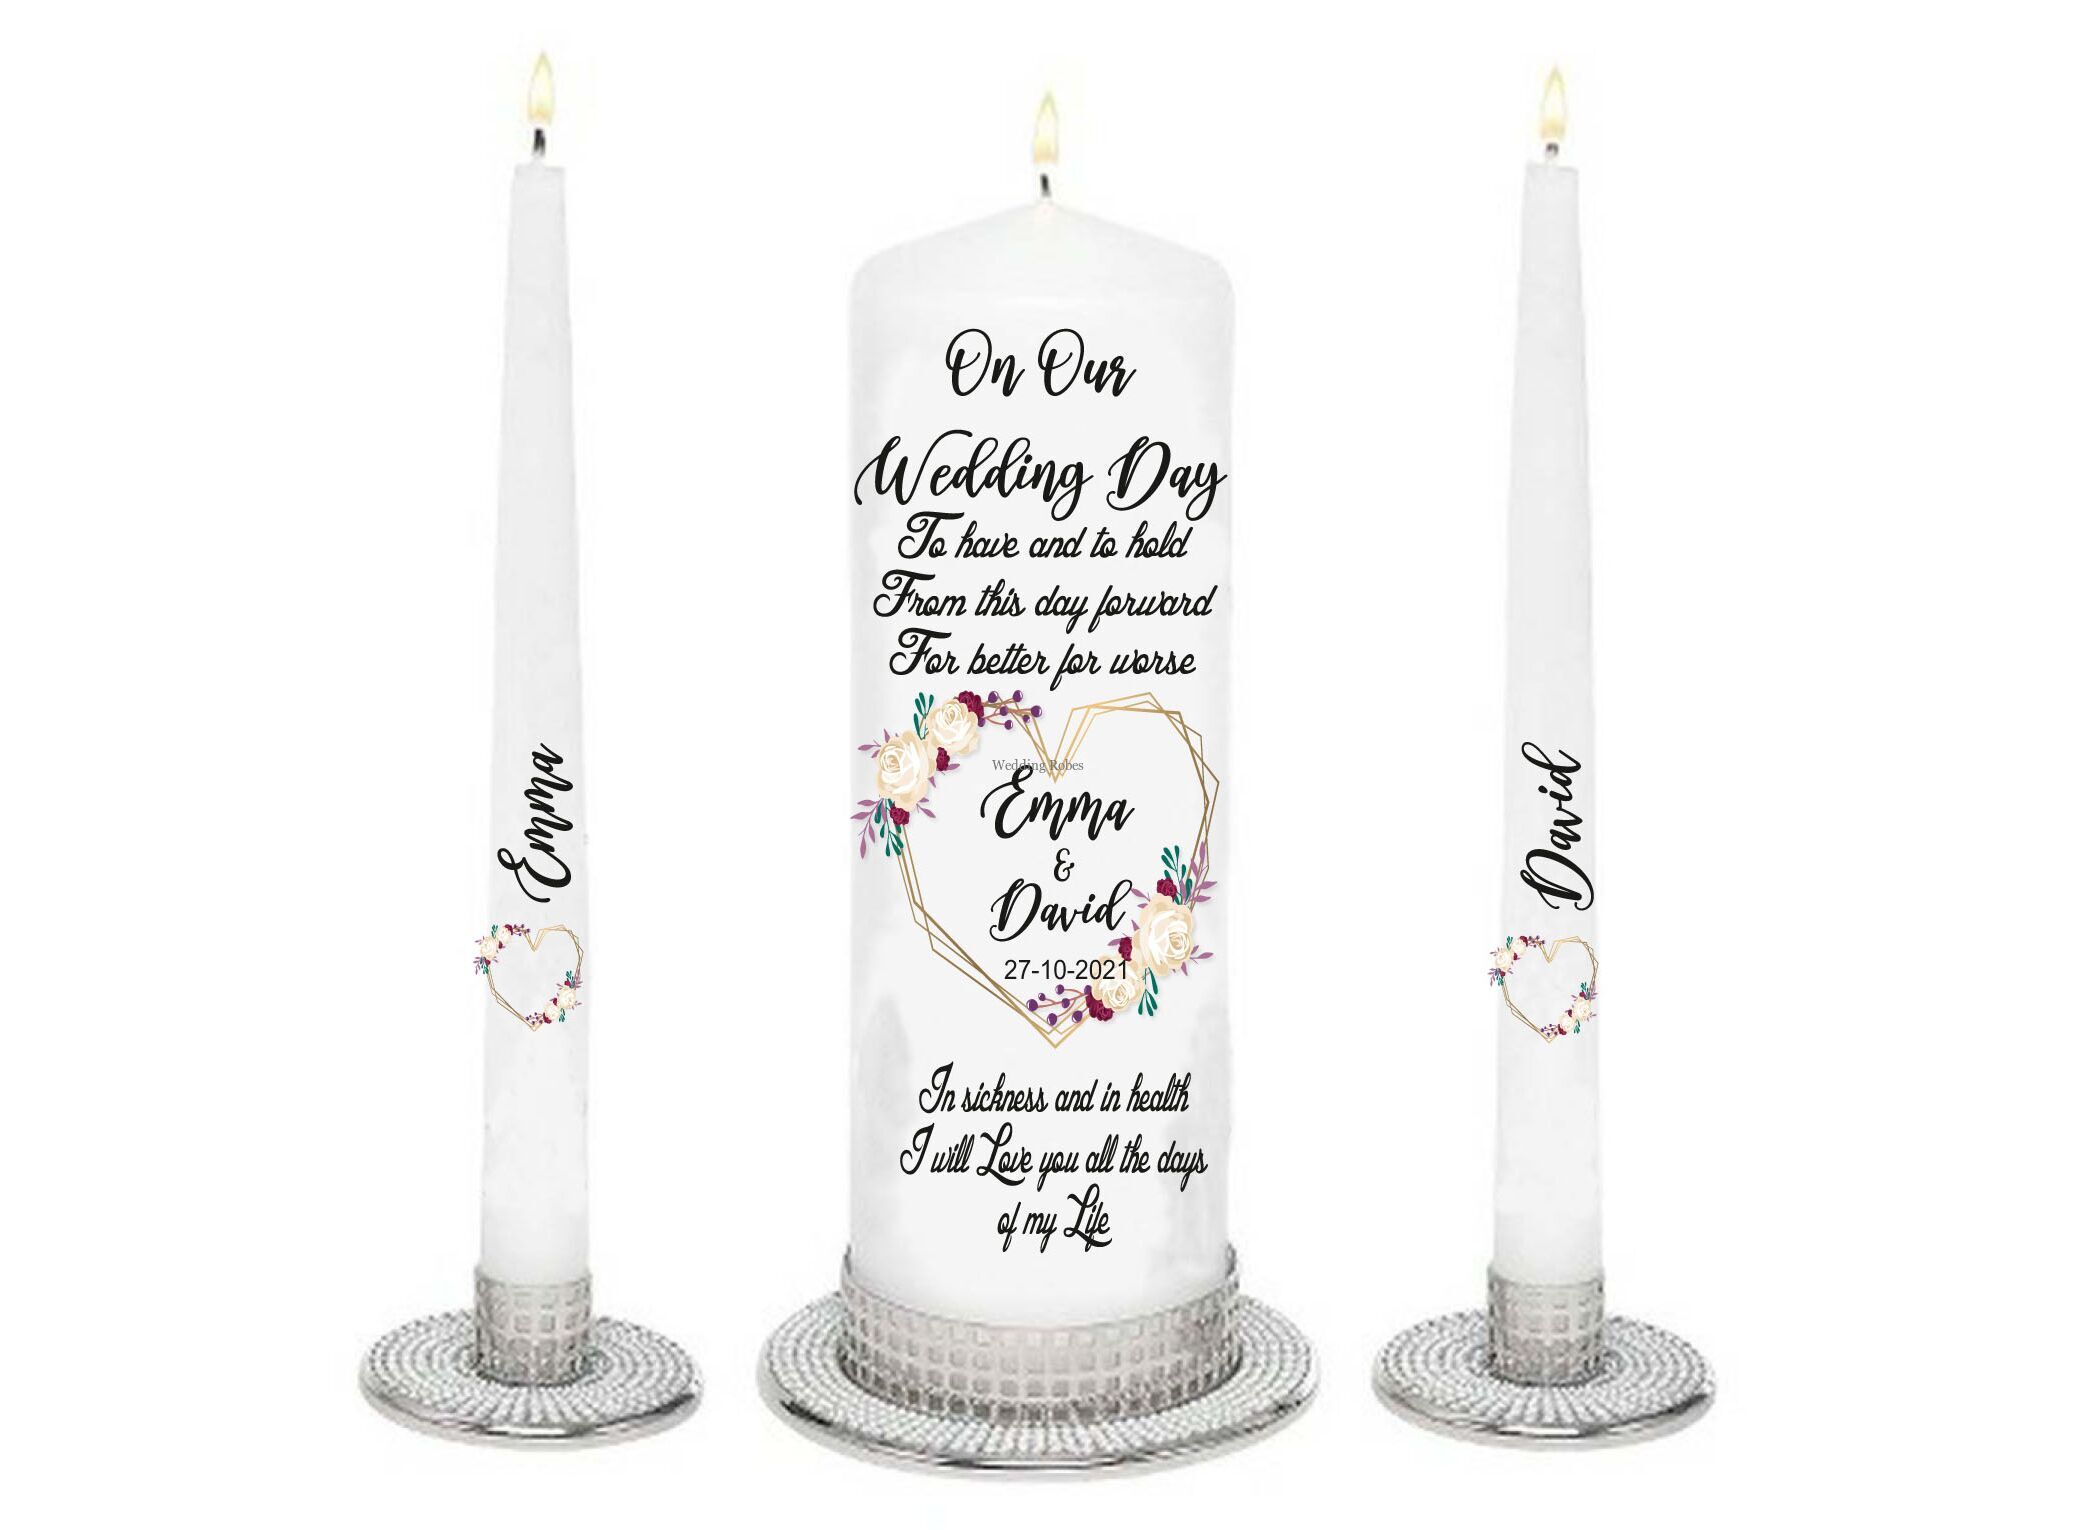 Wedding candles 50% off personalised unity candle sets choose from a wide selection of candles and verses, Heart Frame Unity set